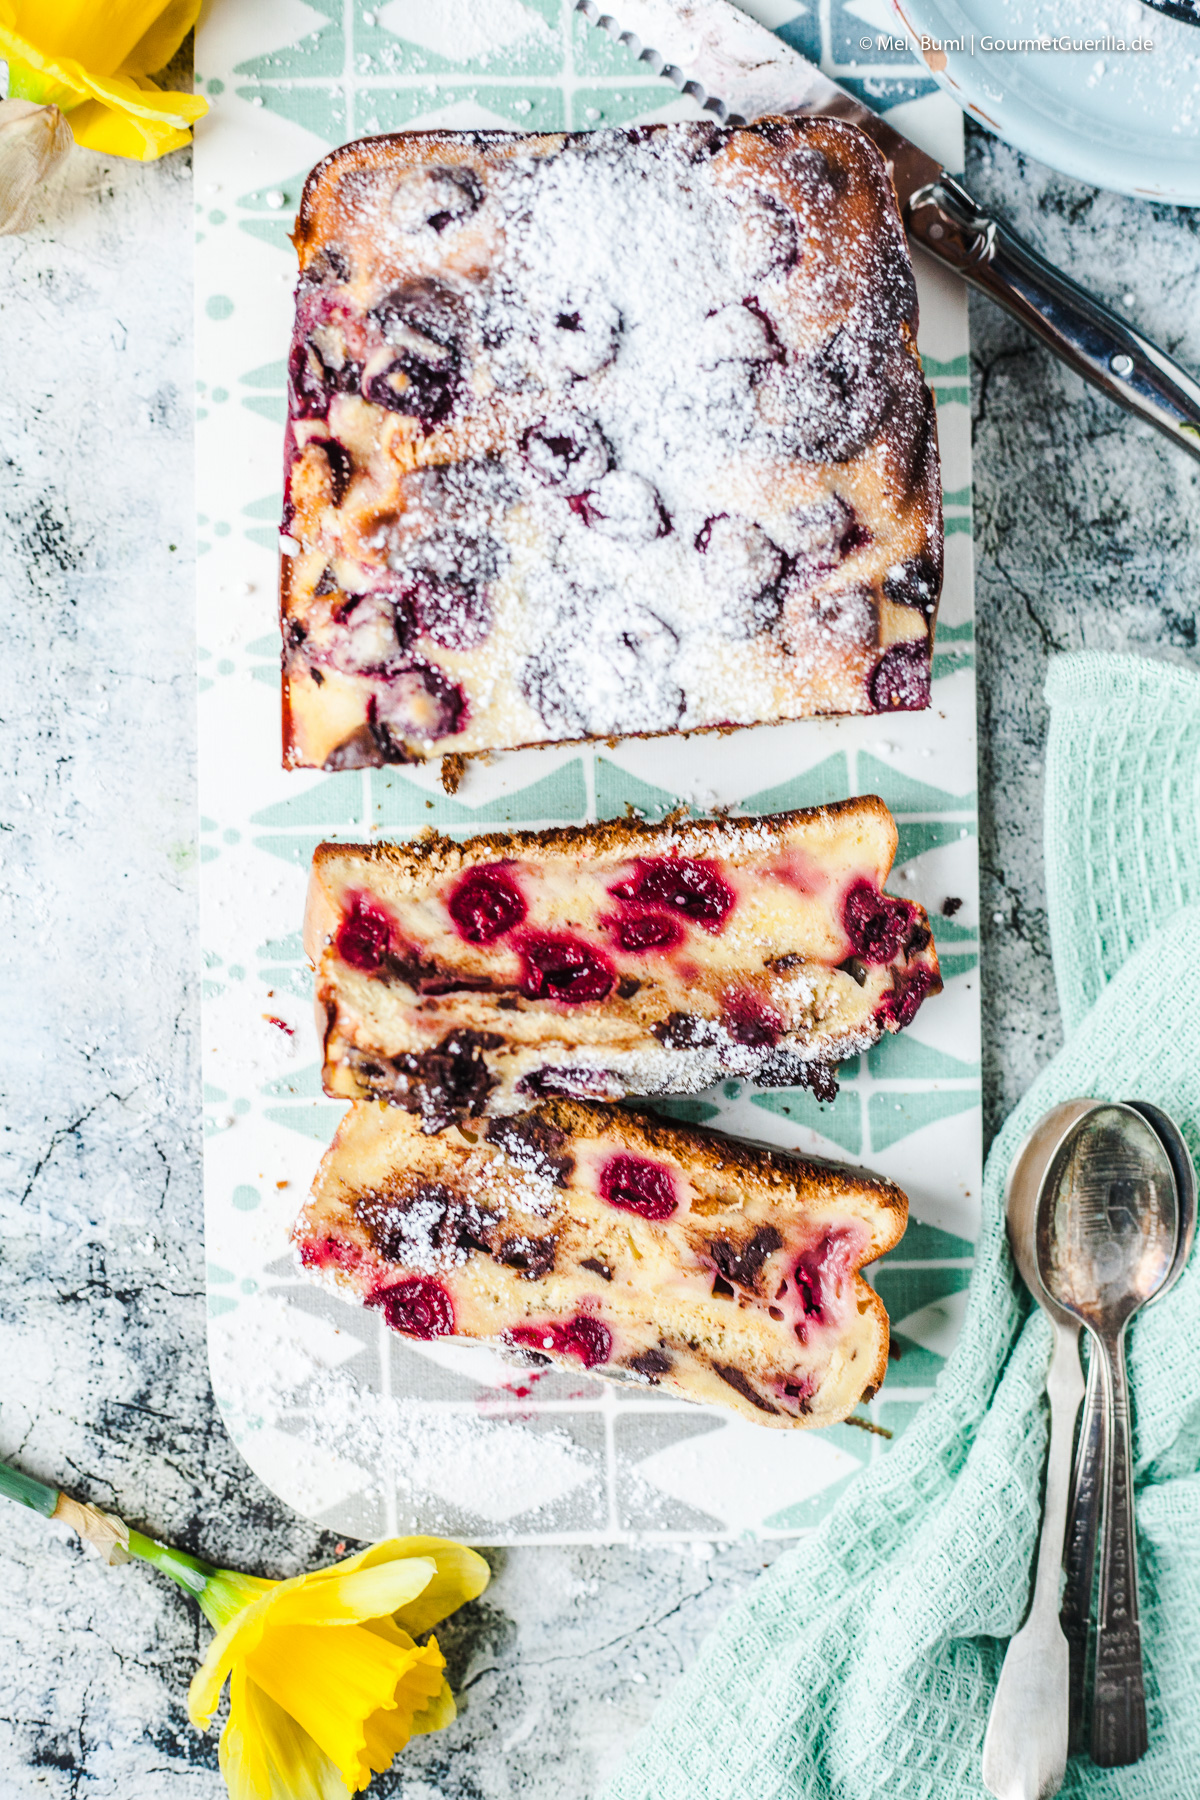 Poor knight cake with cherries and chocolate - remnants for Brioche, Osterzopf and sweet rolls | GourmetGuerilla .de 